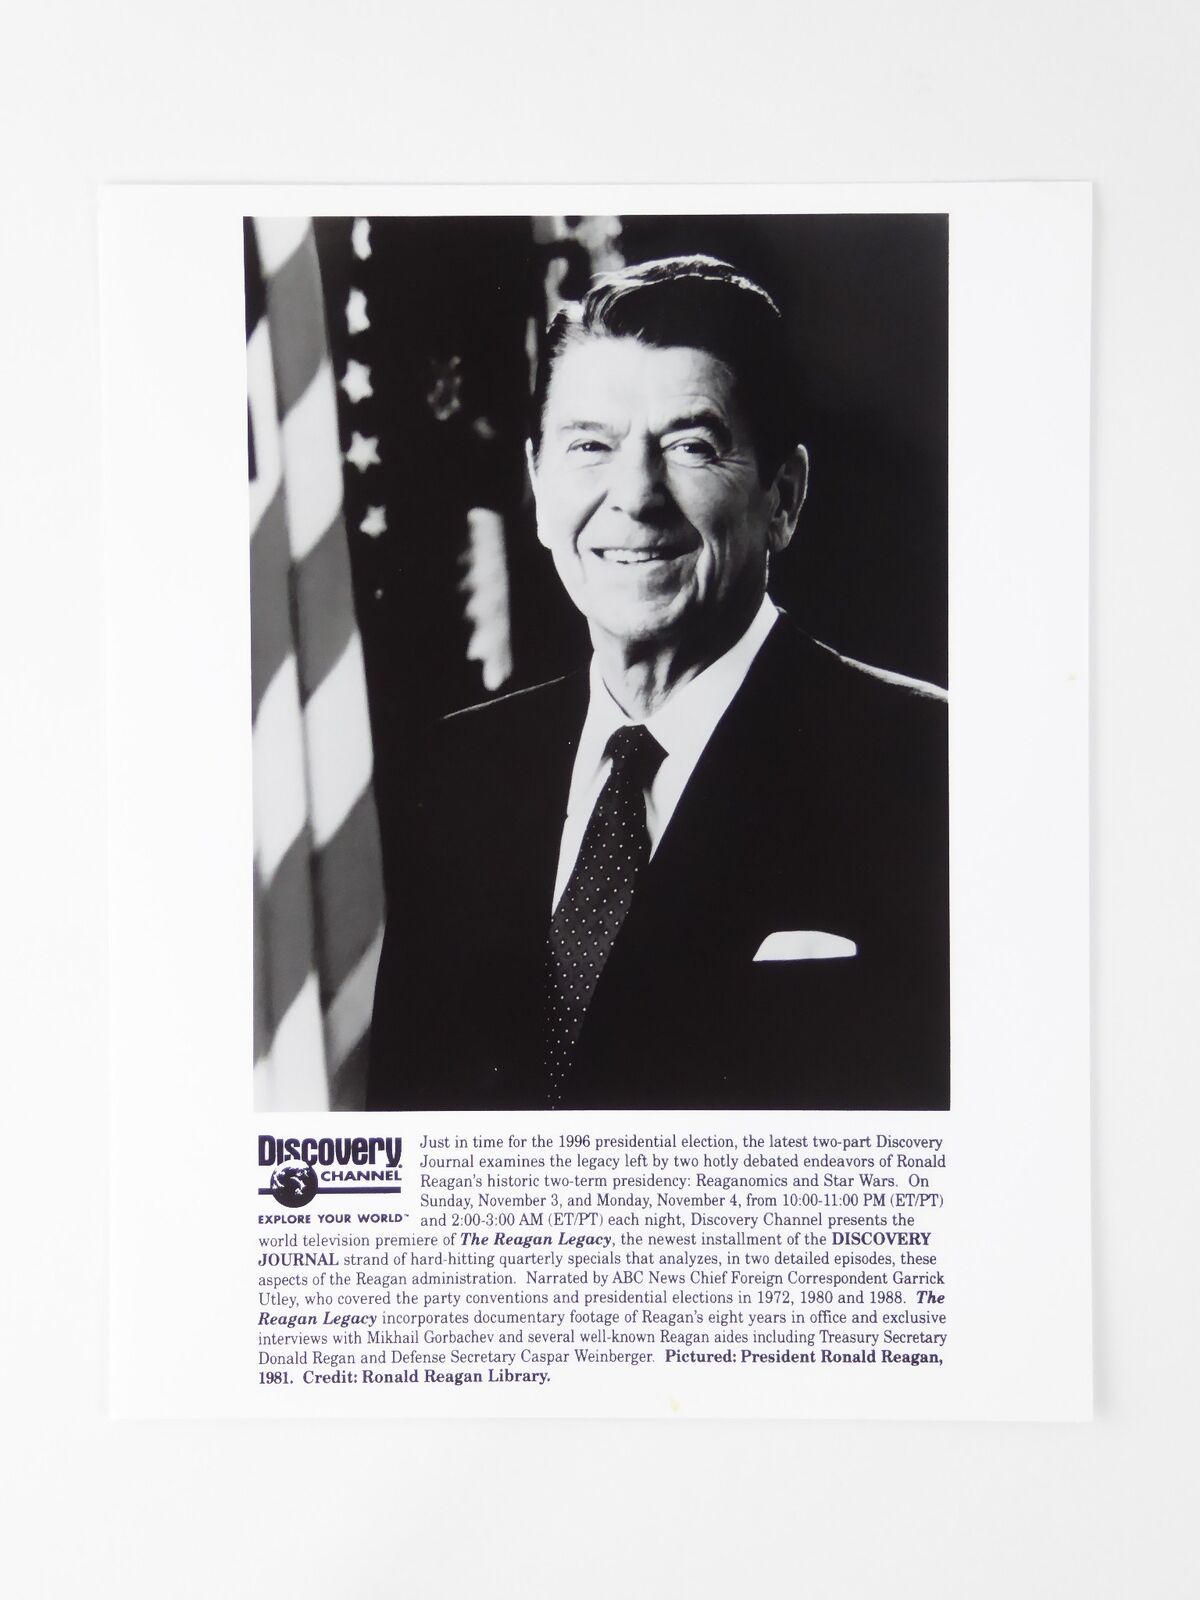 Ronald Reagan Legacy Discovery Channel 1996 8x10 Photo, 2 Negatives, Press Kit